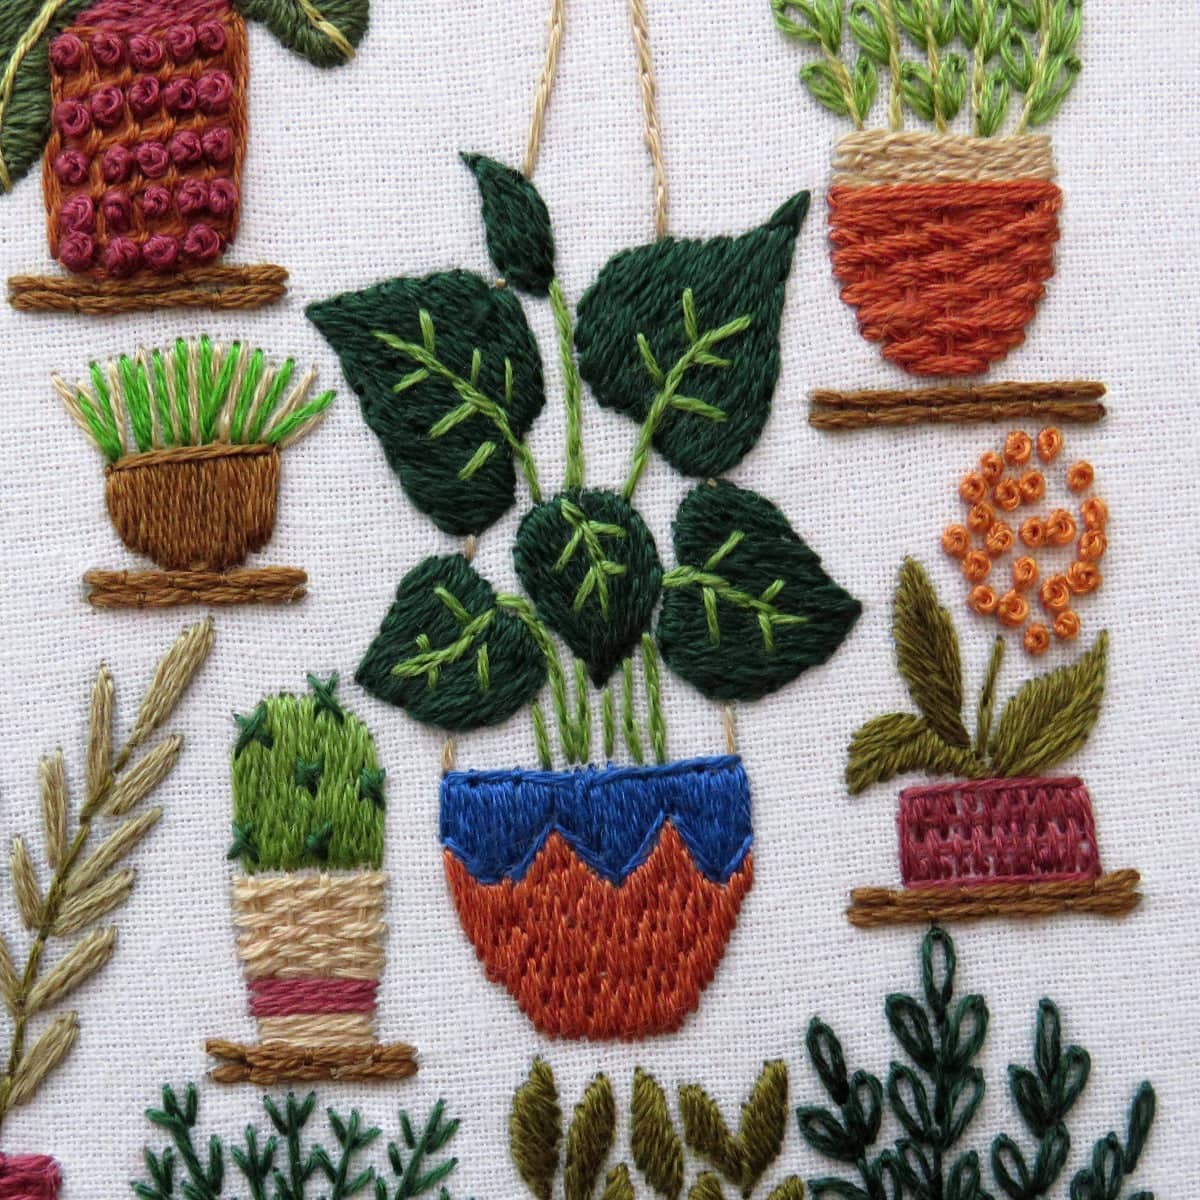 Plantopia, Hand Embroidery Pattern , PDF Download , StitchDoodles , Embroidery, embroidery hoop kit, embroidery kit for adults, embroidery kit for beginers, embroidery pattern, flower embroidery, hand embroidery, modern embroidery, wildlife embroidery , StitchDoodles , shop.stitchdoodles.com